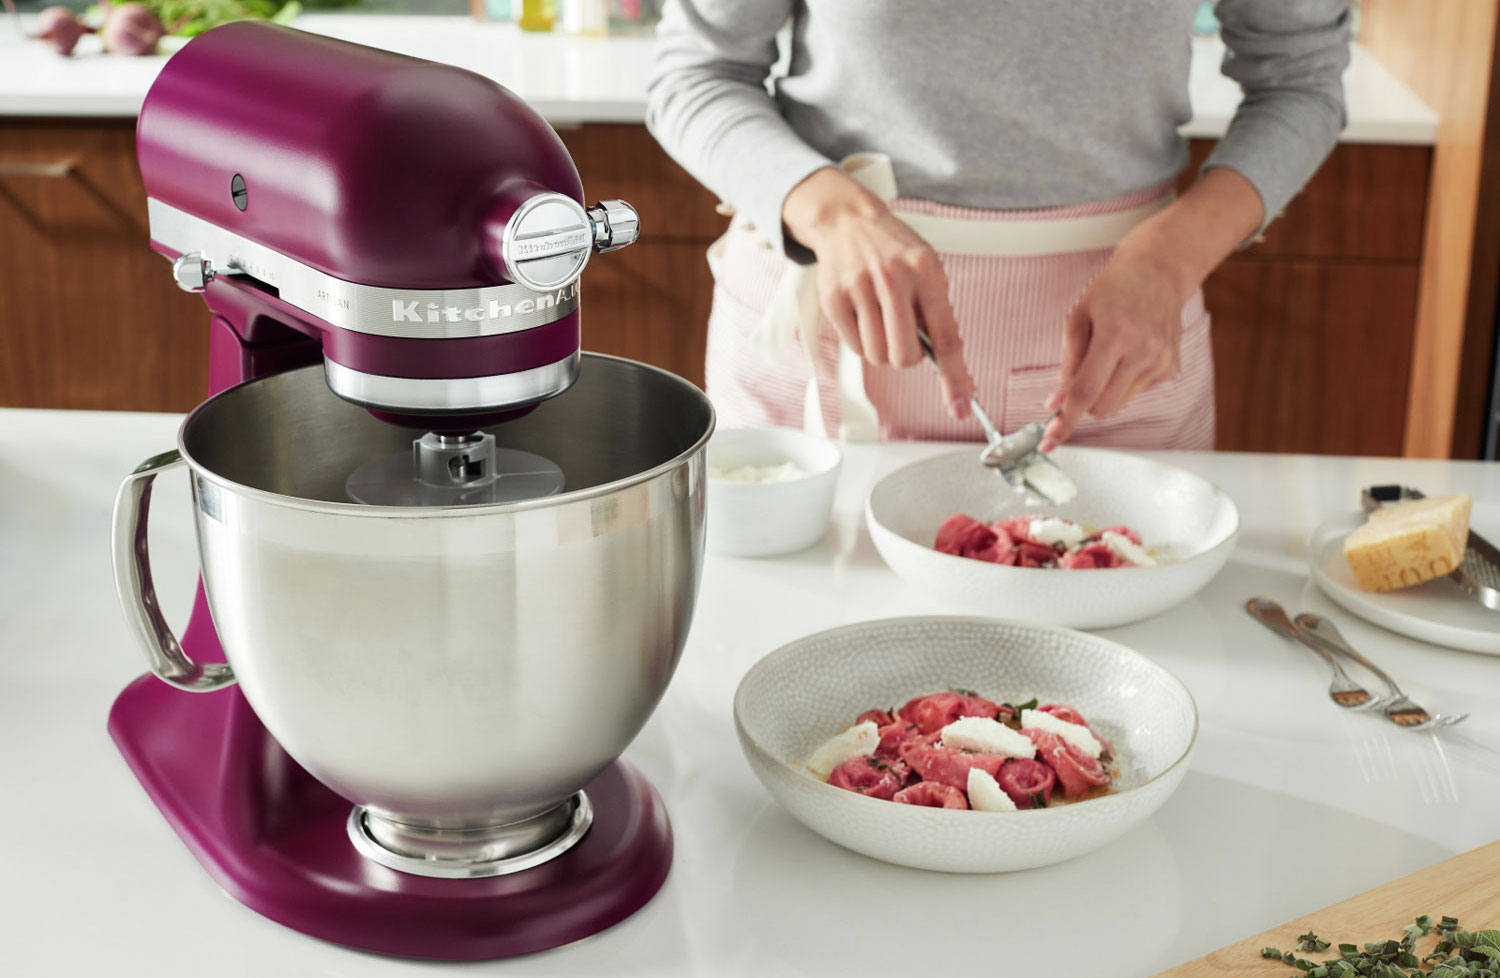 10 Kitchen Appliances That Make Cooking Faster & Easier